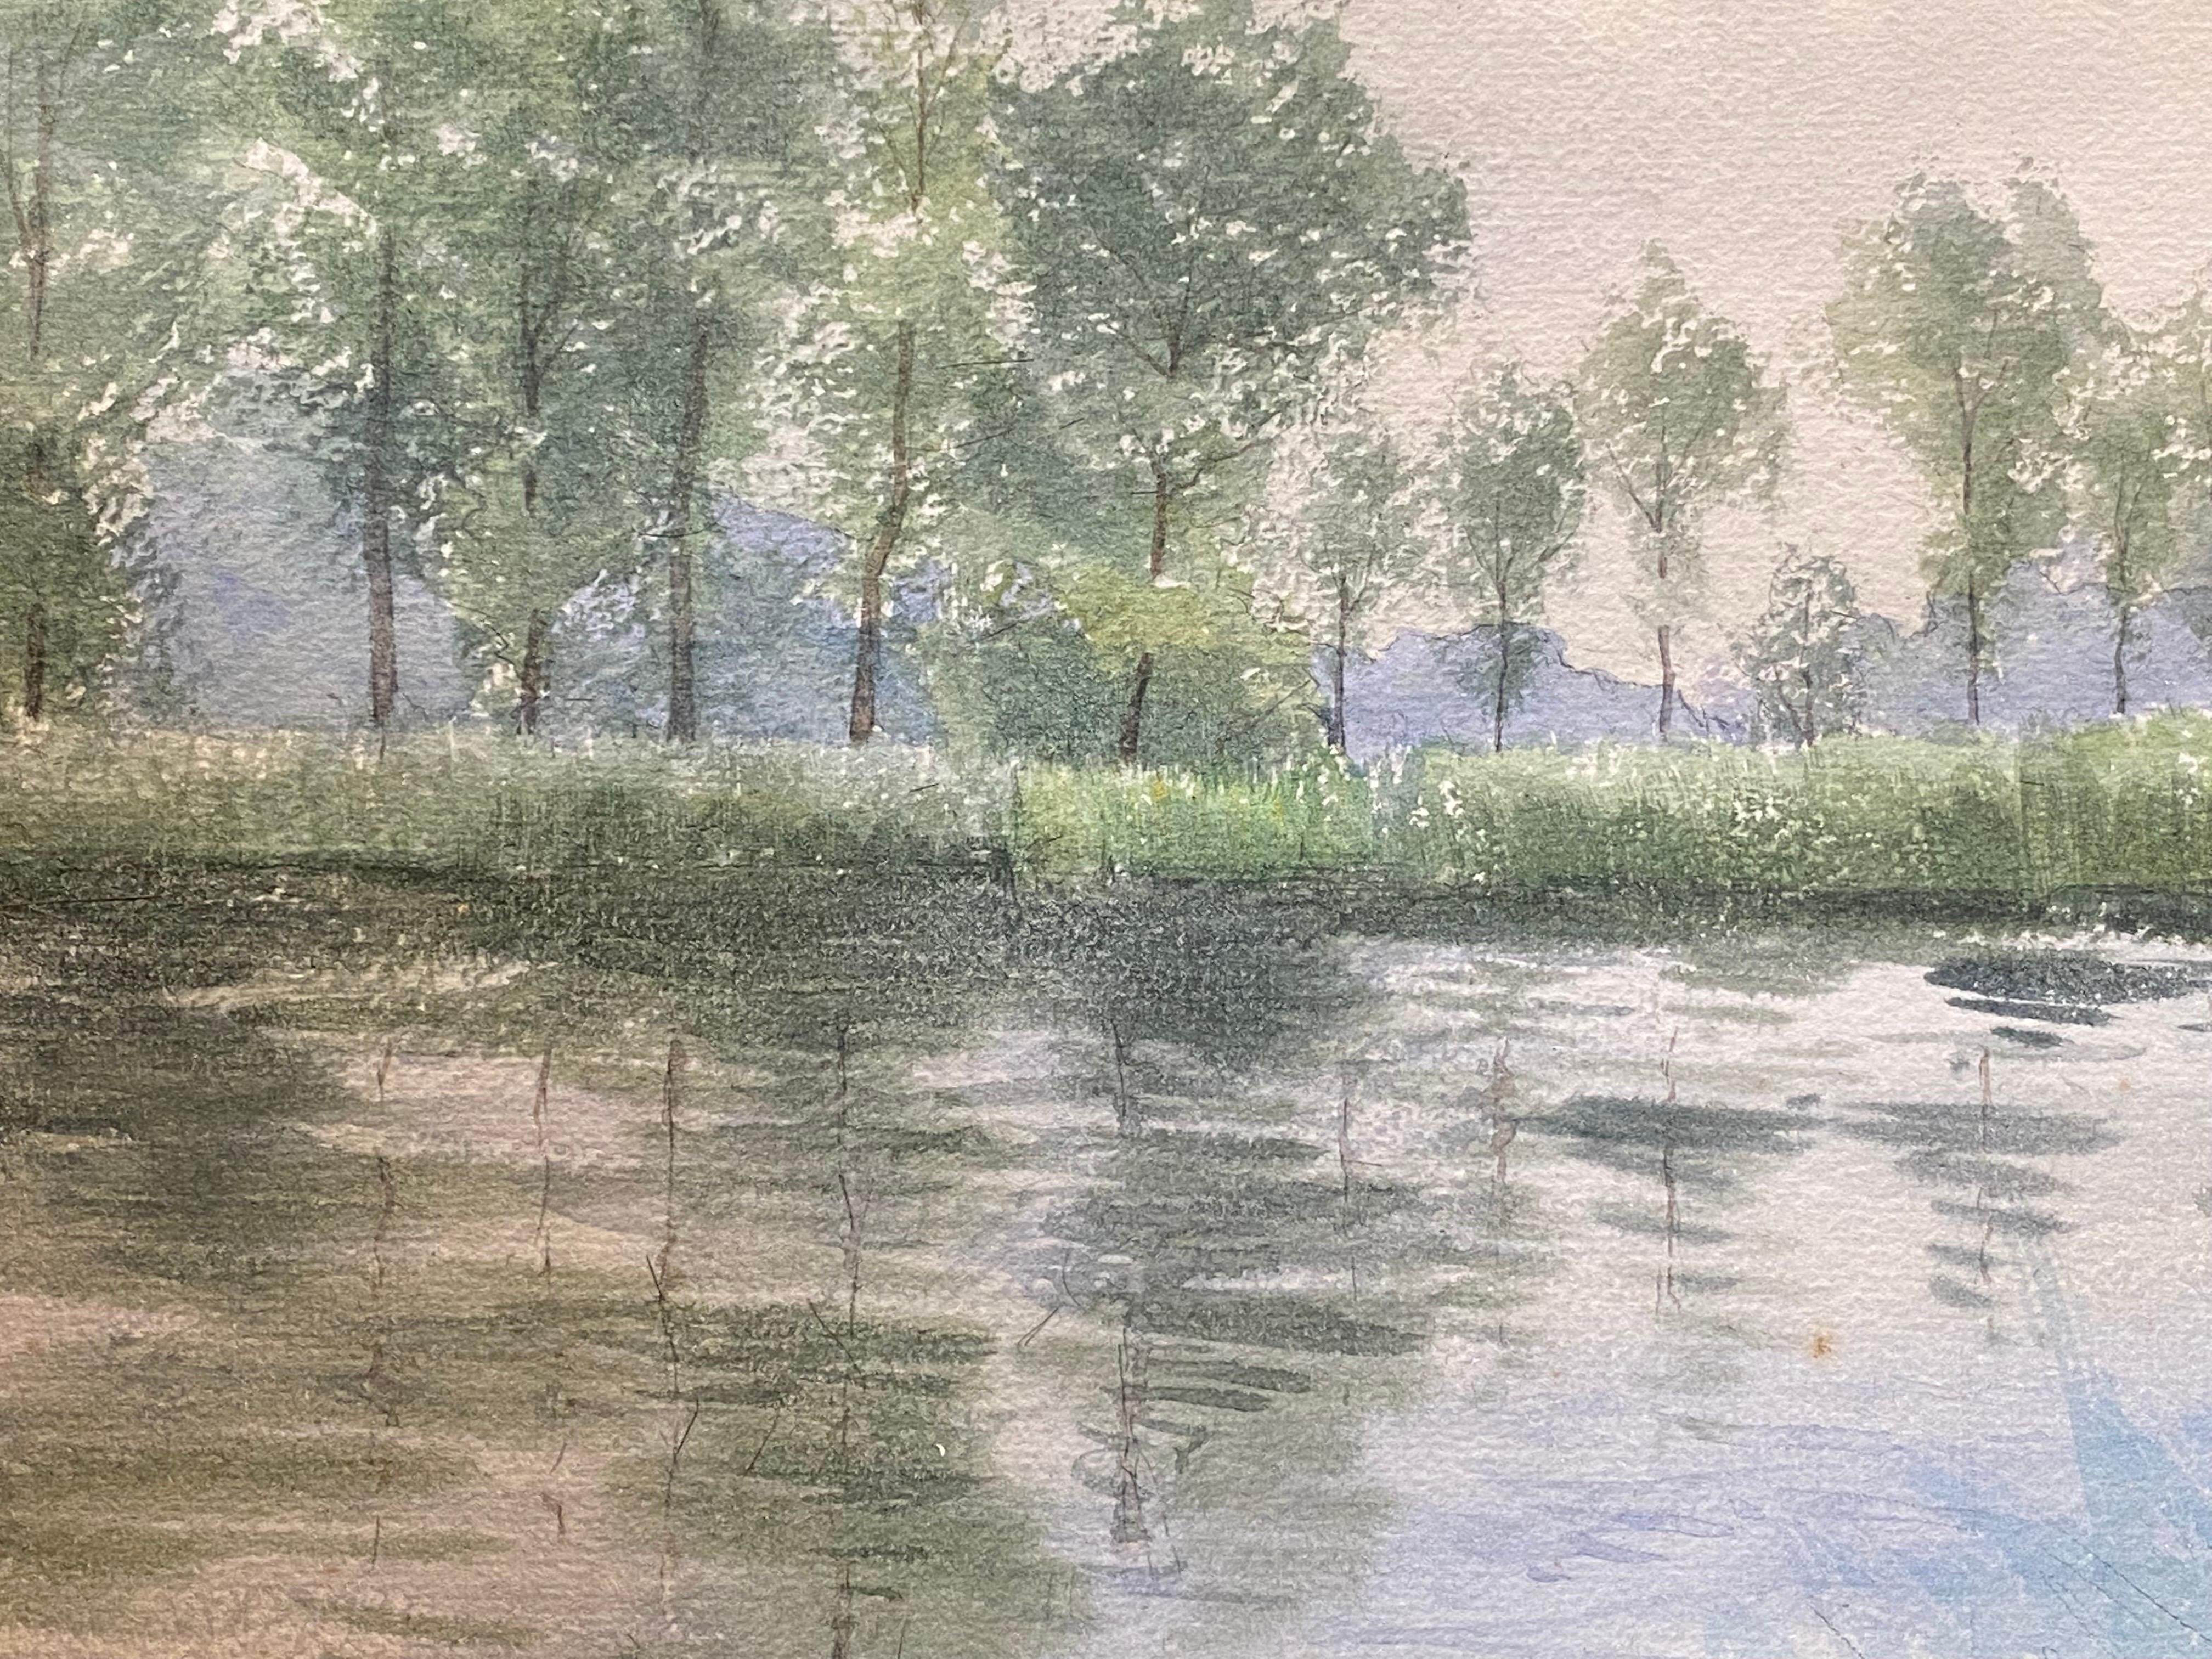 Artist/ School: French School,  early 20th century

Title: Willows by the River

Medium: watercolour painting on board, unframed

painting: 10.5 x 15 inches

Provenance: private collection, France

Condition: The painting is in overall very good and